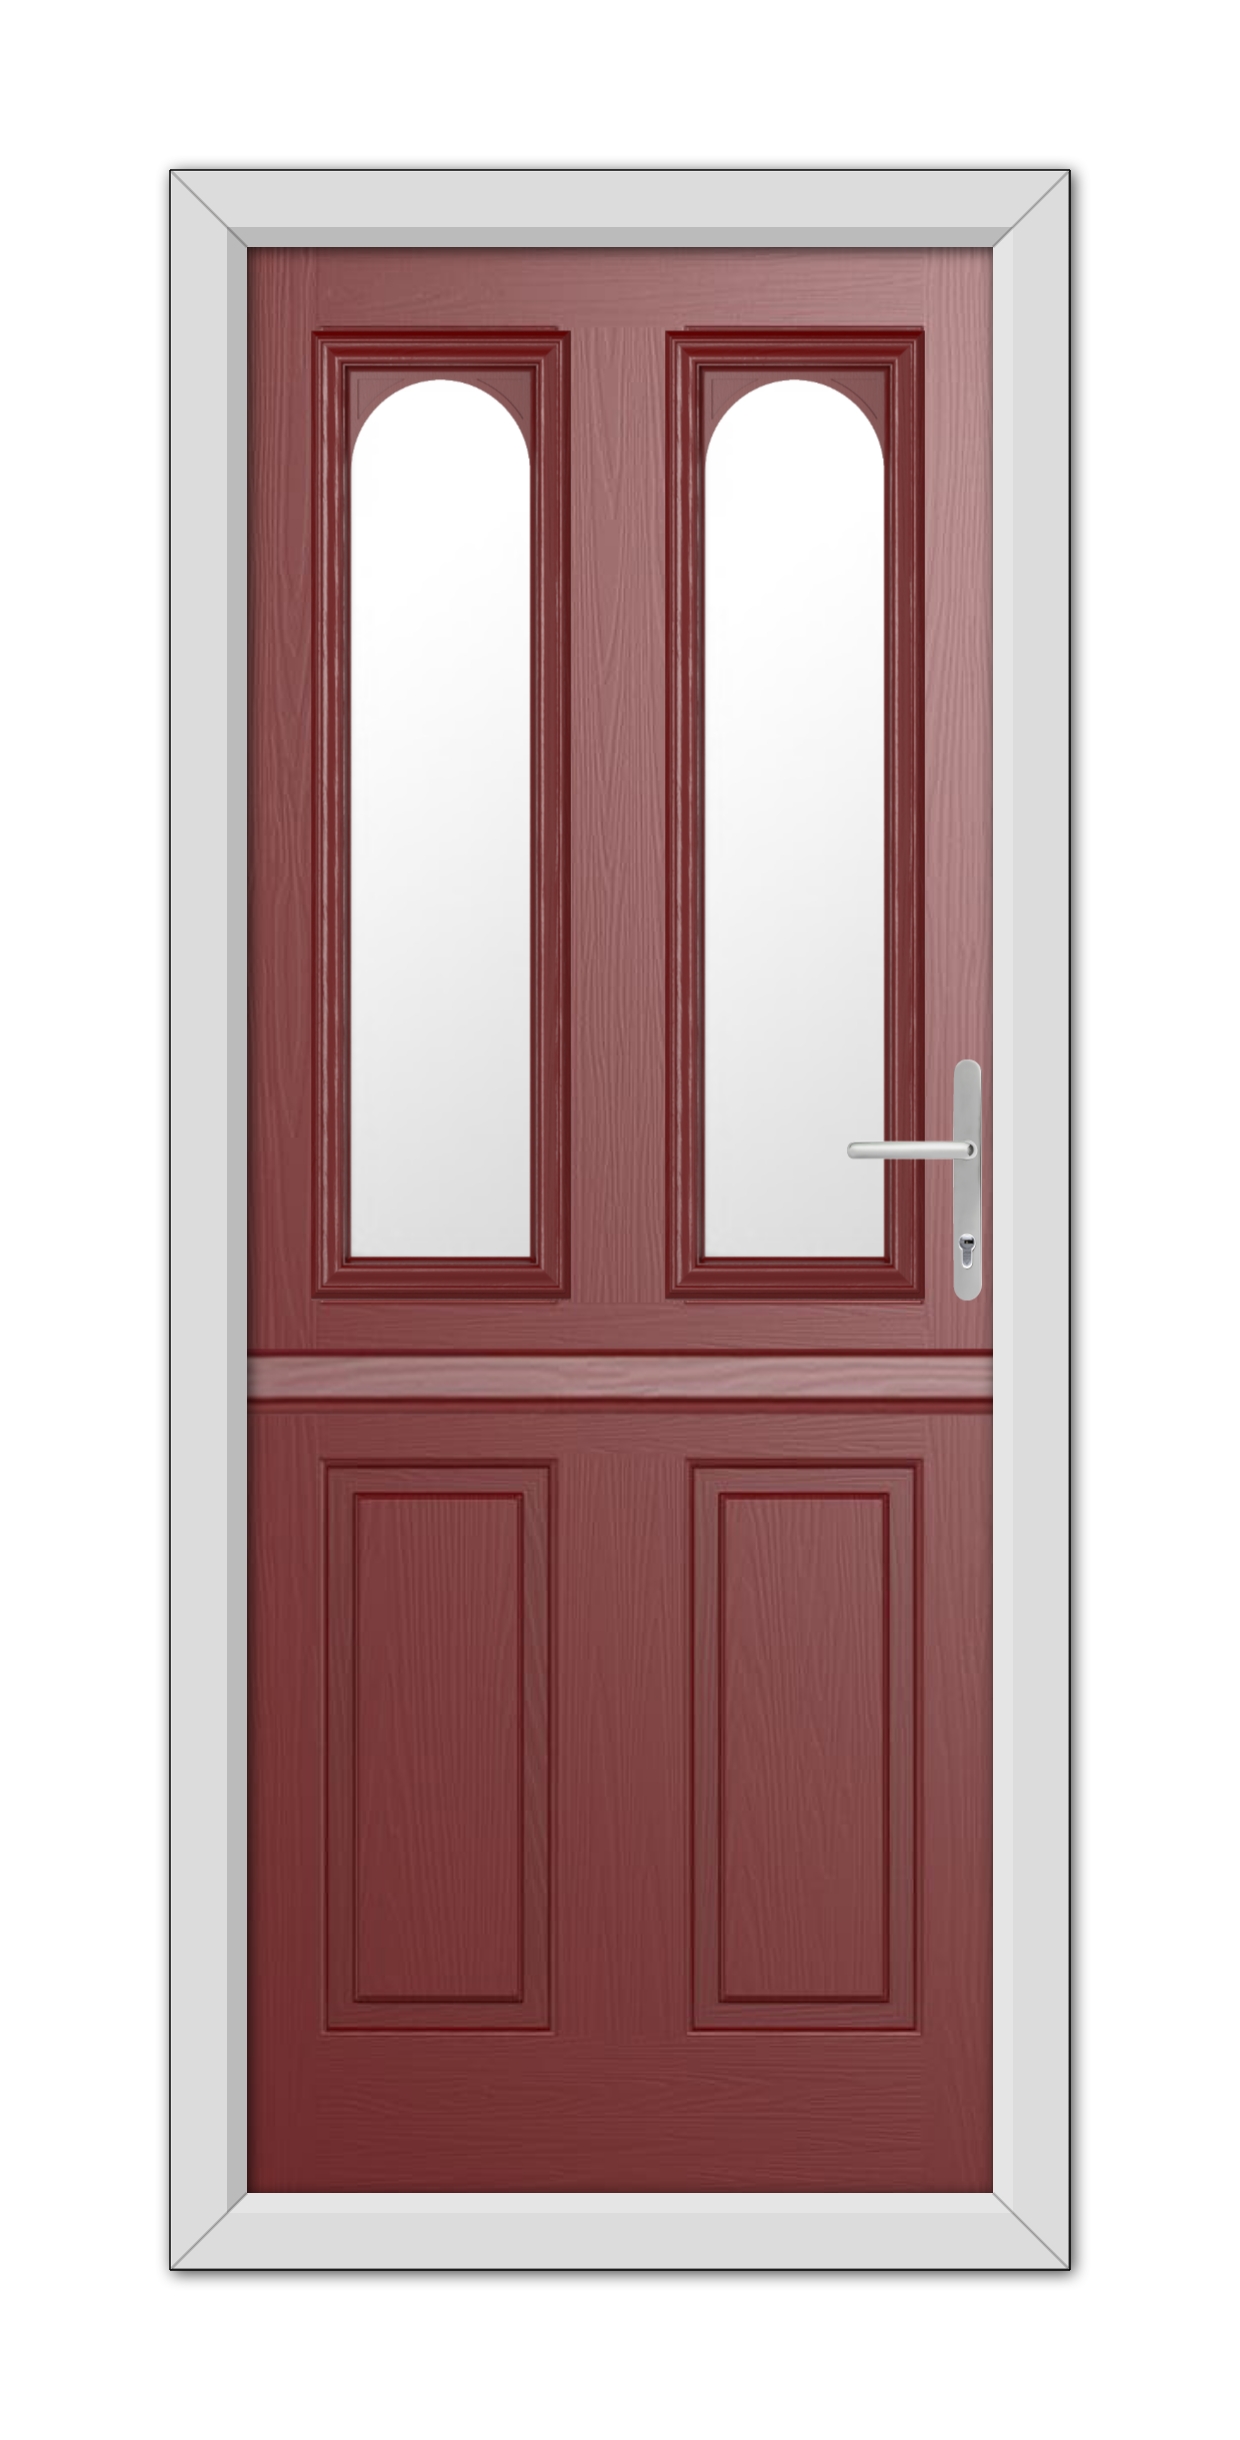 Red Elmhurst Stable Composite door with white trim, featuring half-length clear windows and a metal handle on the right side.